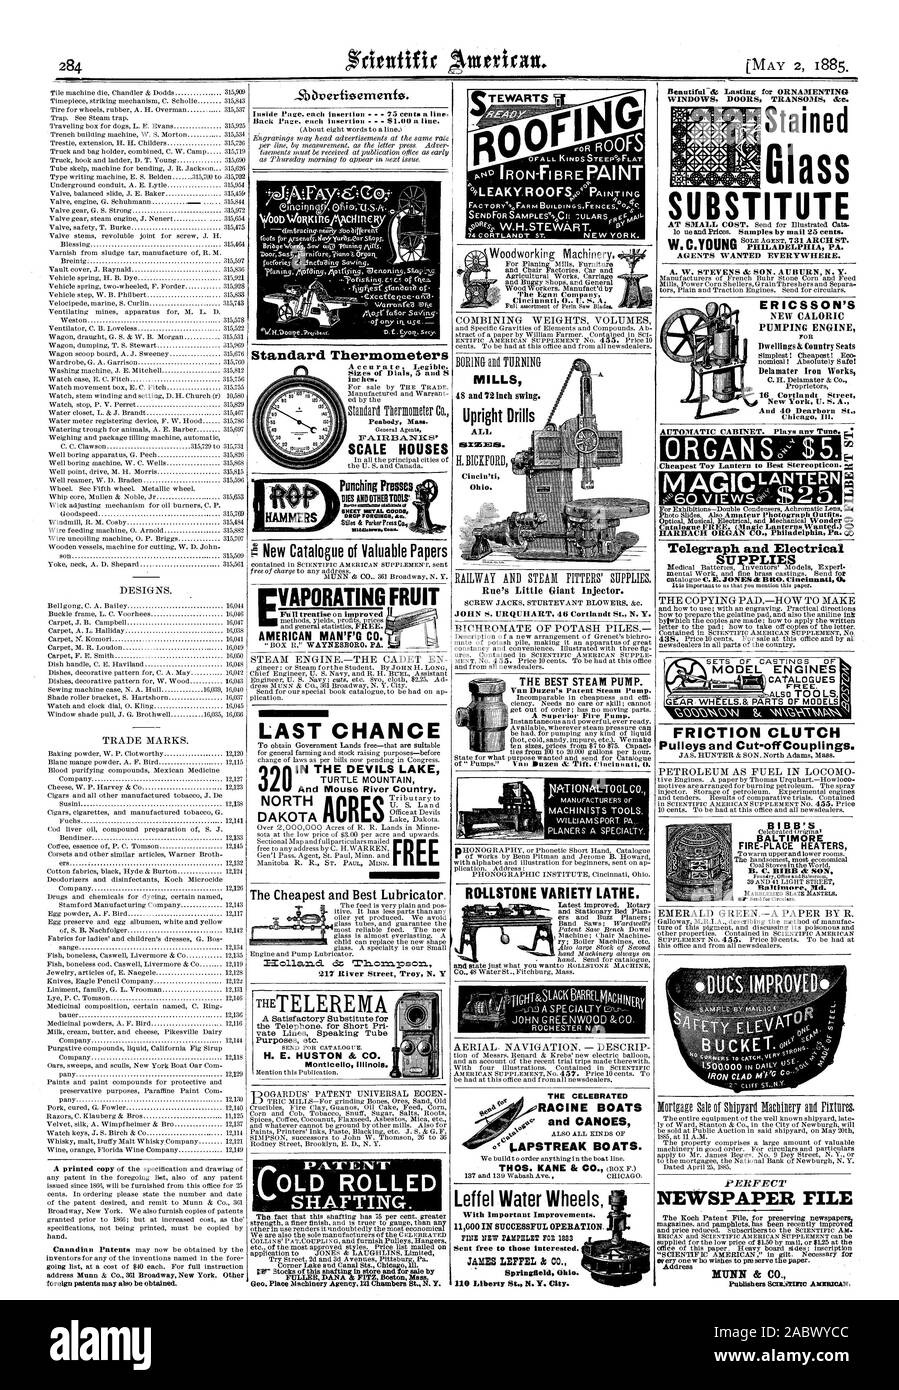 New Catalogue of Valuable Papers AMERICAN MAN'F'G CO. LAST CHANCE U And Mouse River Country. TURTLE MOUNTAIN 217 River Street Troy N. Y THETELERE MA H. E. HUSTON & CO. LOLD ROLLED SHAFTING. Upright Drills ALL Rue's Little Giant Injector. THE BEST STEAM PUMP. ROLLSTONE VARIETY LATHE. RACINE BOATS and CANOES LAPSTREAK BOATS. Leffel Water Wheels Springfield Ohio. AGENTS WANTED EVERYWHERE. PUMPING ENGINE 16 Cortlandt Street New York U. S. A. And 40 Dearborn St. ORGANSS$5. Standard Thermometers THE CELEBRATED WINDOWS DOORS TRANSOMS &a. Stained Glass SUBSTITUTE Telegraph and Electrical Ul PLI1cp Stock Photo